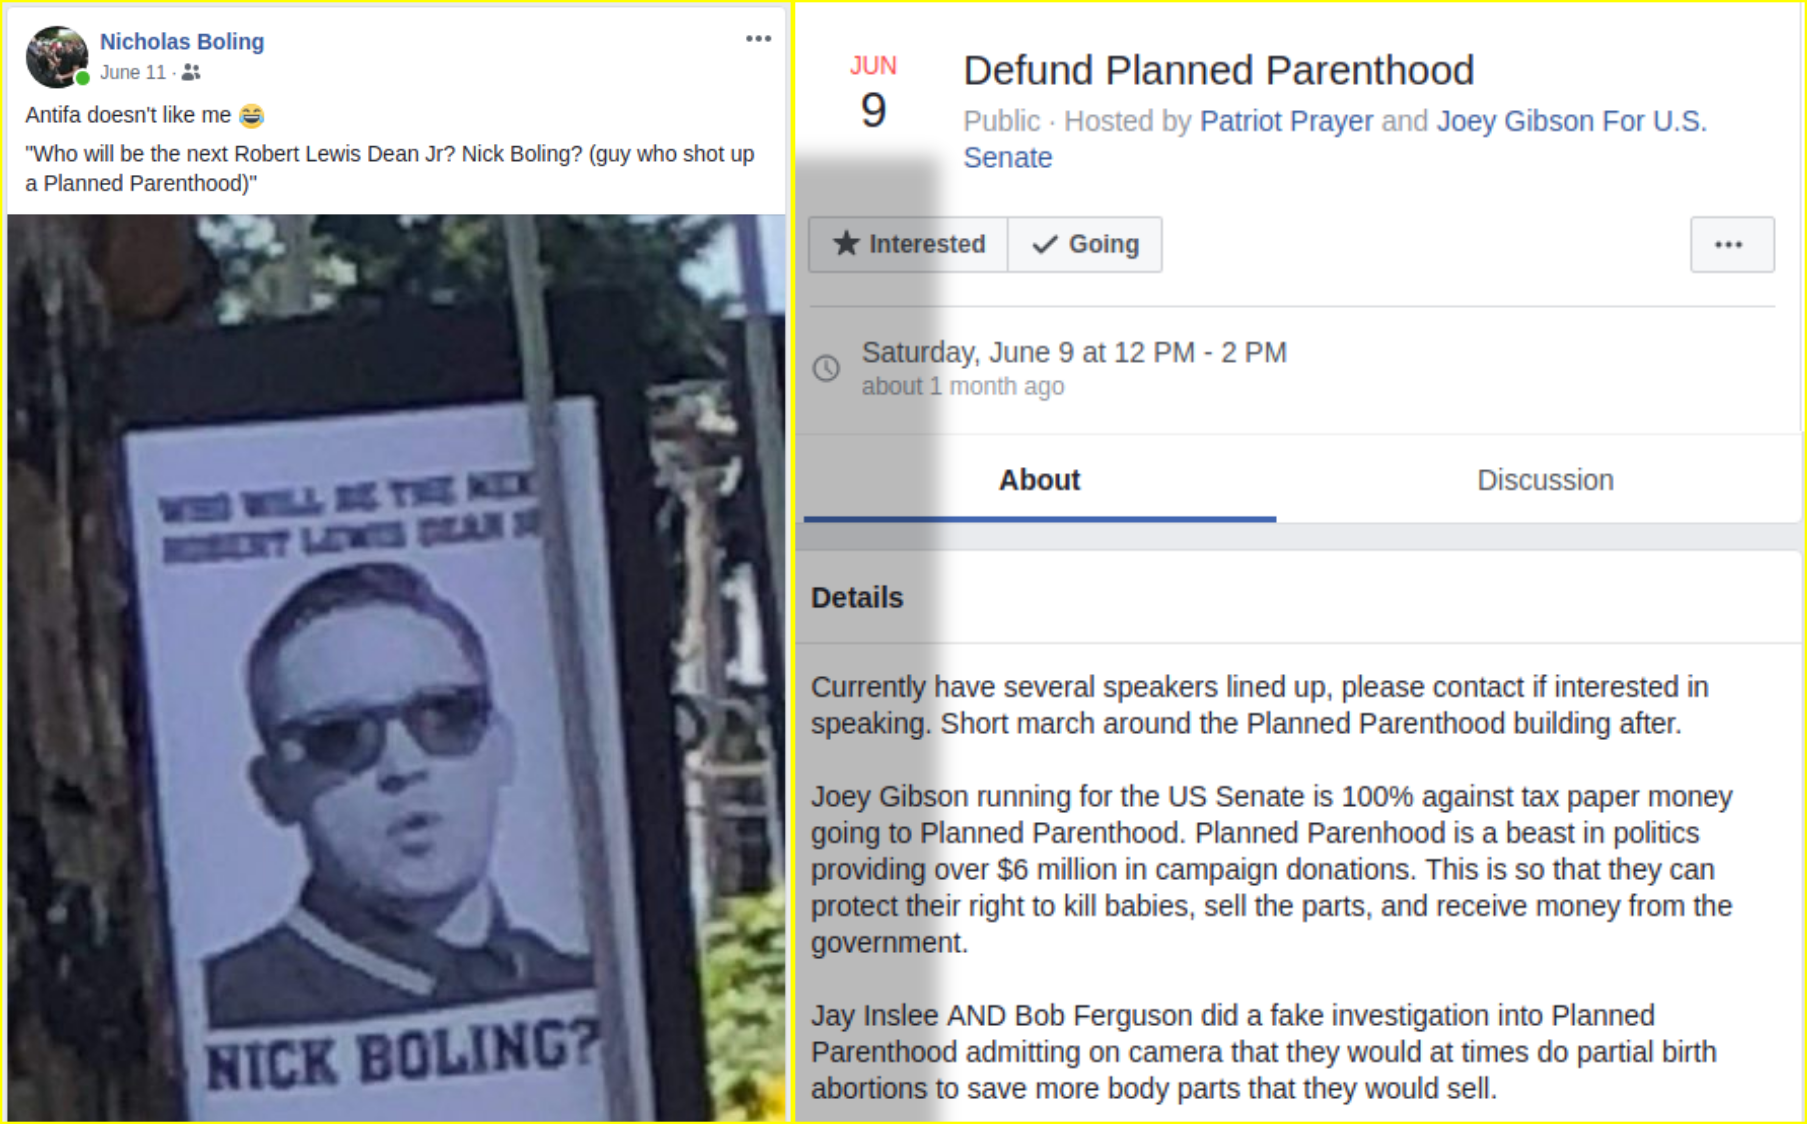 Nick Boling attends an anti-abortion rally using rhetoric that has inspired shootings